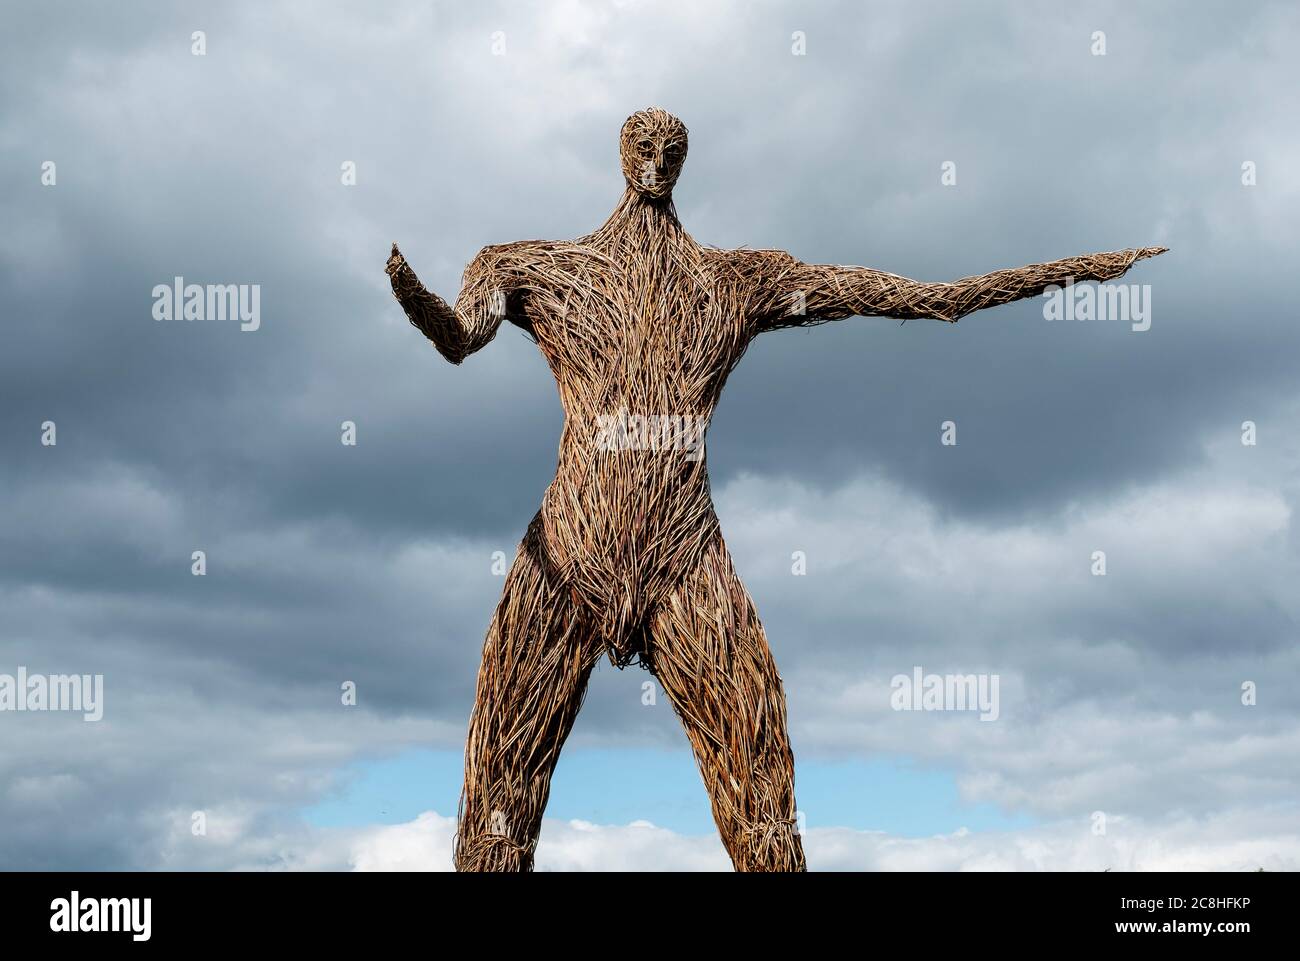 A wicker man sculpture stands with outstretched arms in a rural field near Dundrennan, Dumfries and Galloway, Scotland Stock Photo